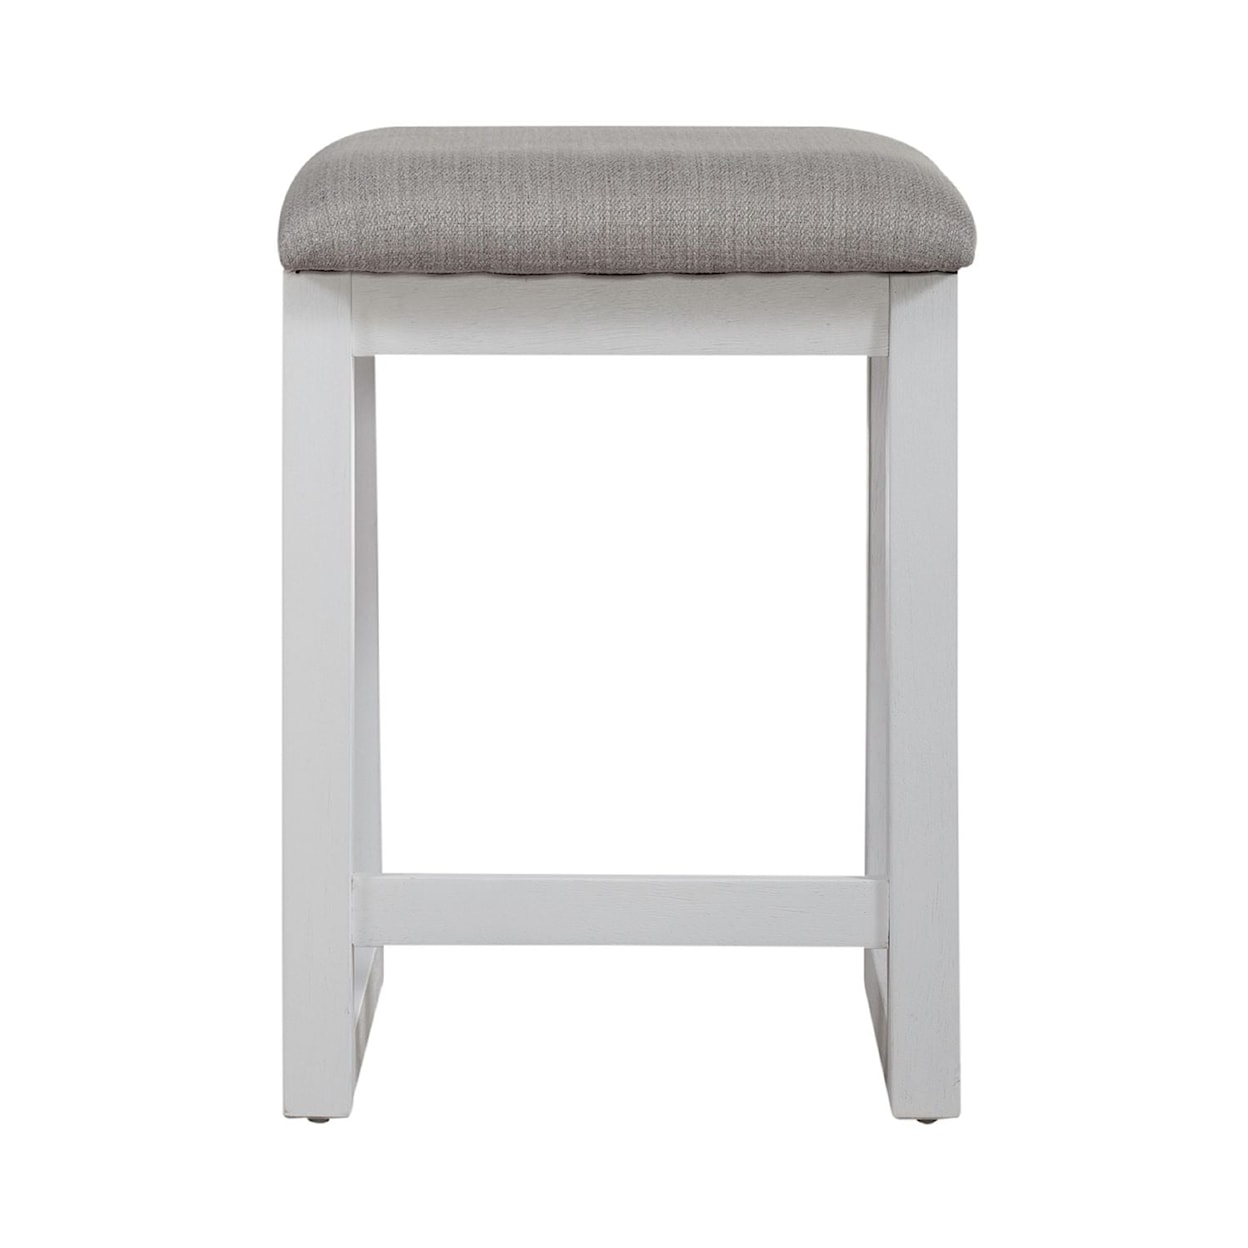 Libby Palmetto Heights Upholstered Console Stool